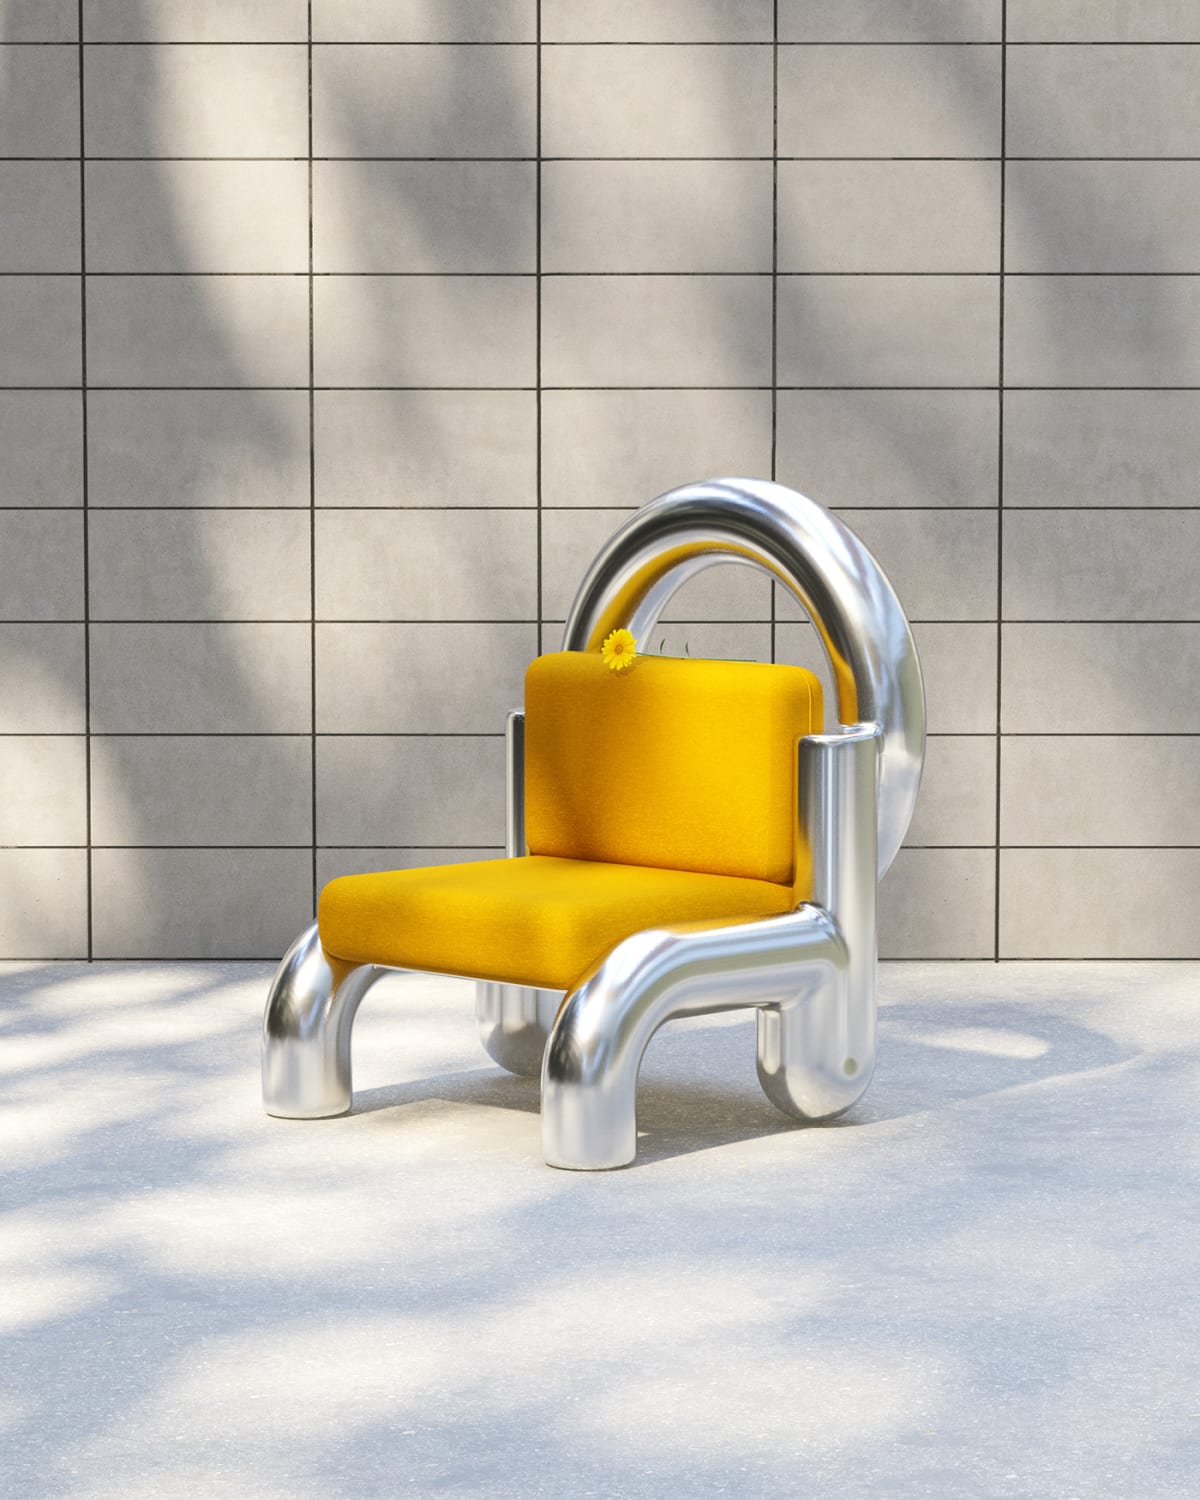 Isolation Chair 2020